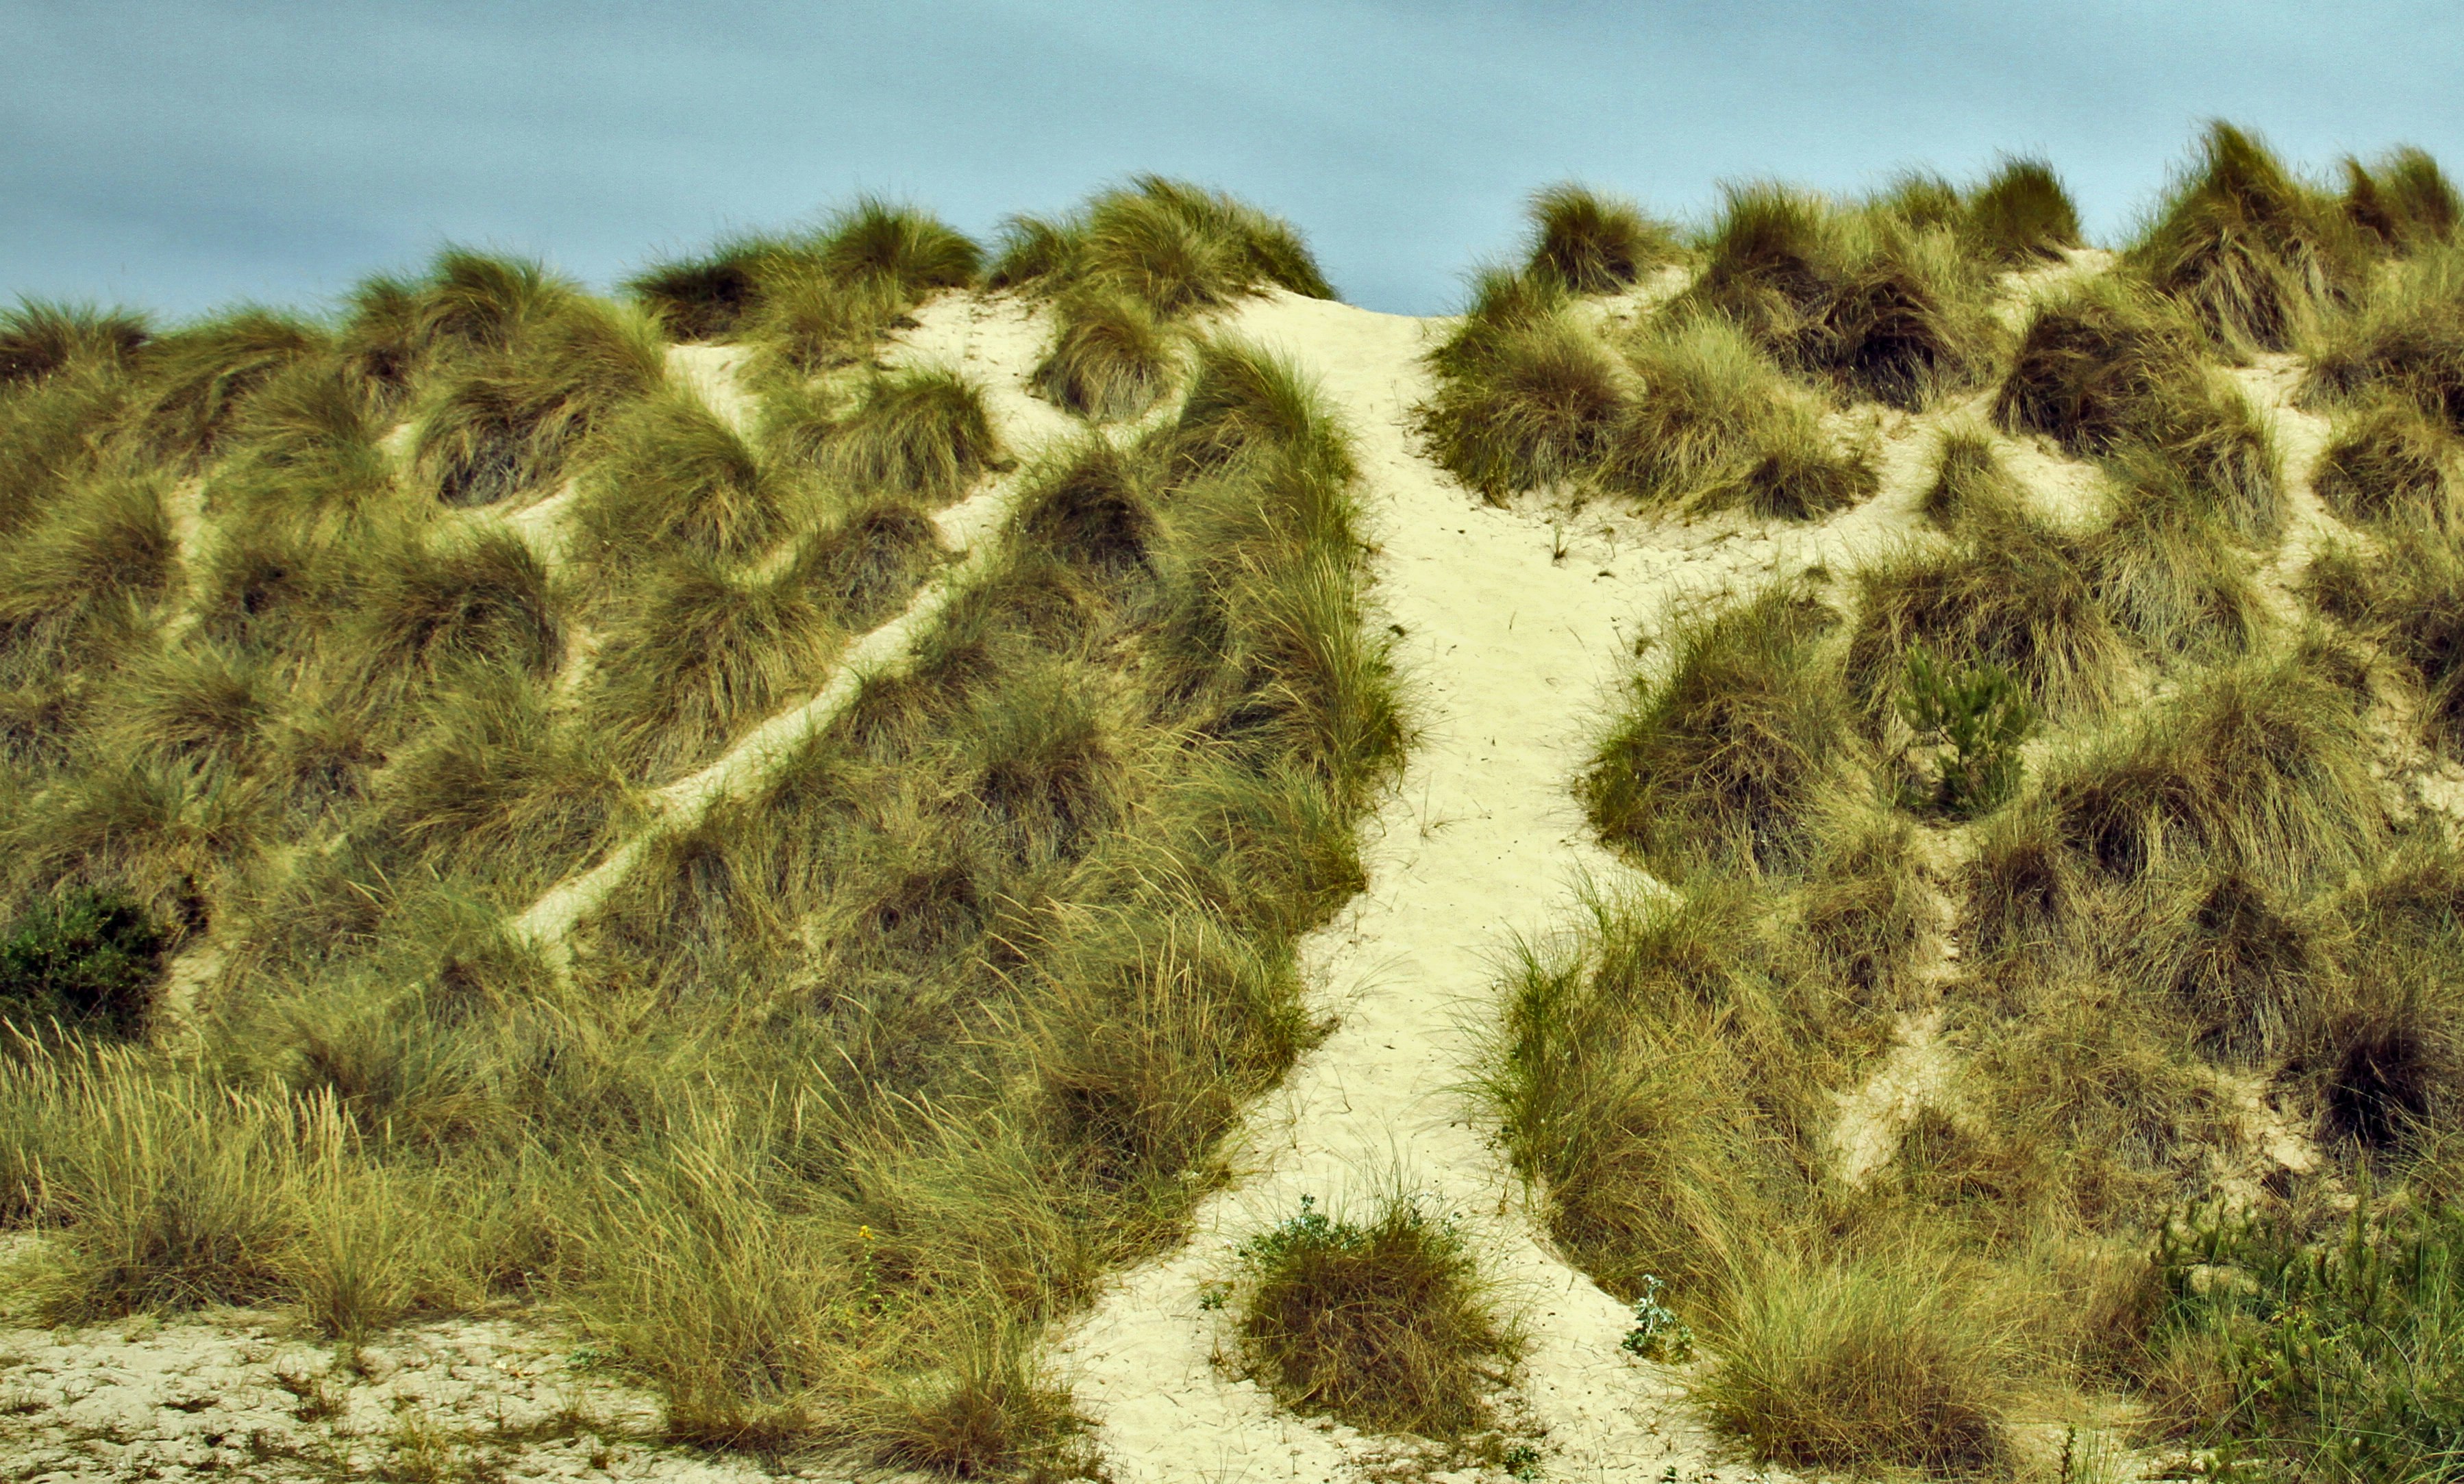 Big tufts of grass on a sand dune, Mallorca, Spain, July 2016